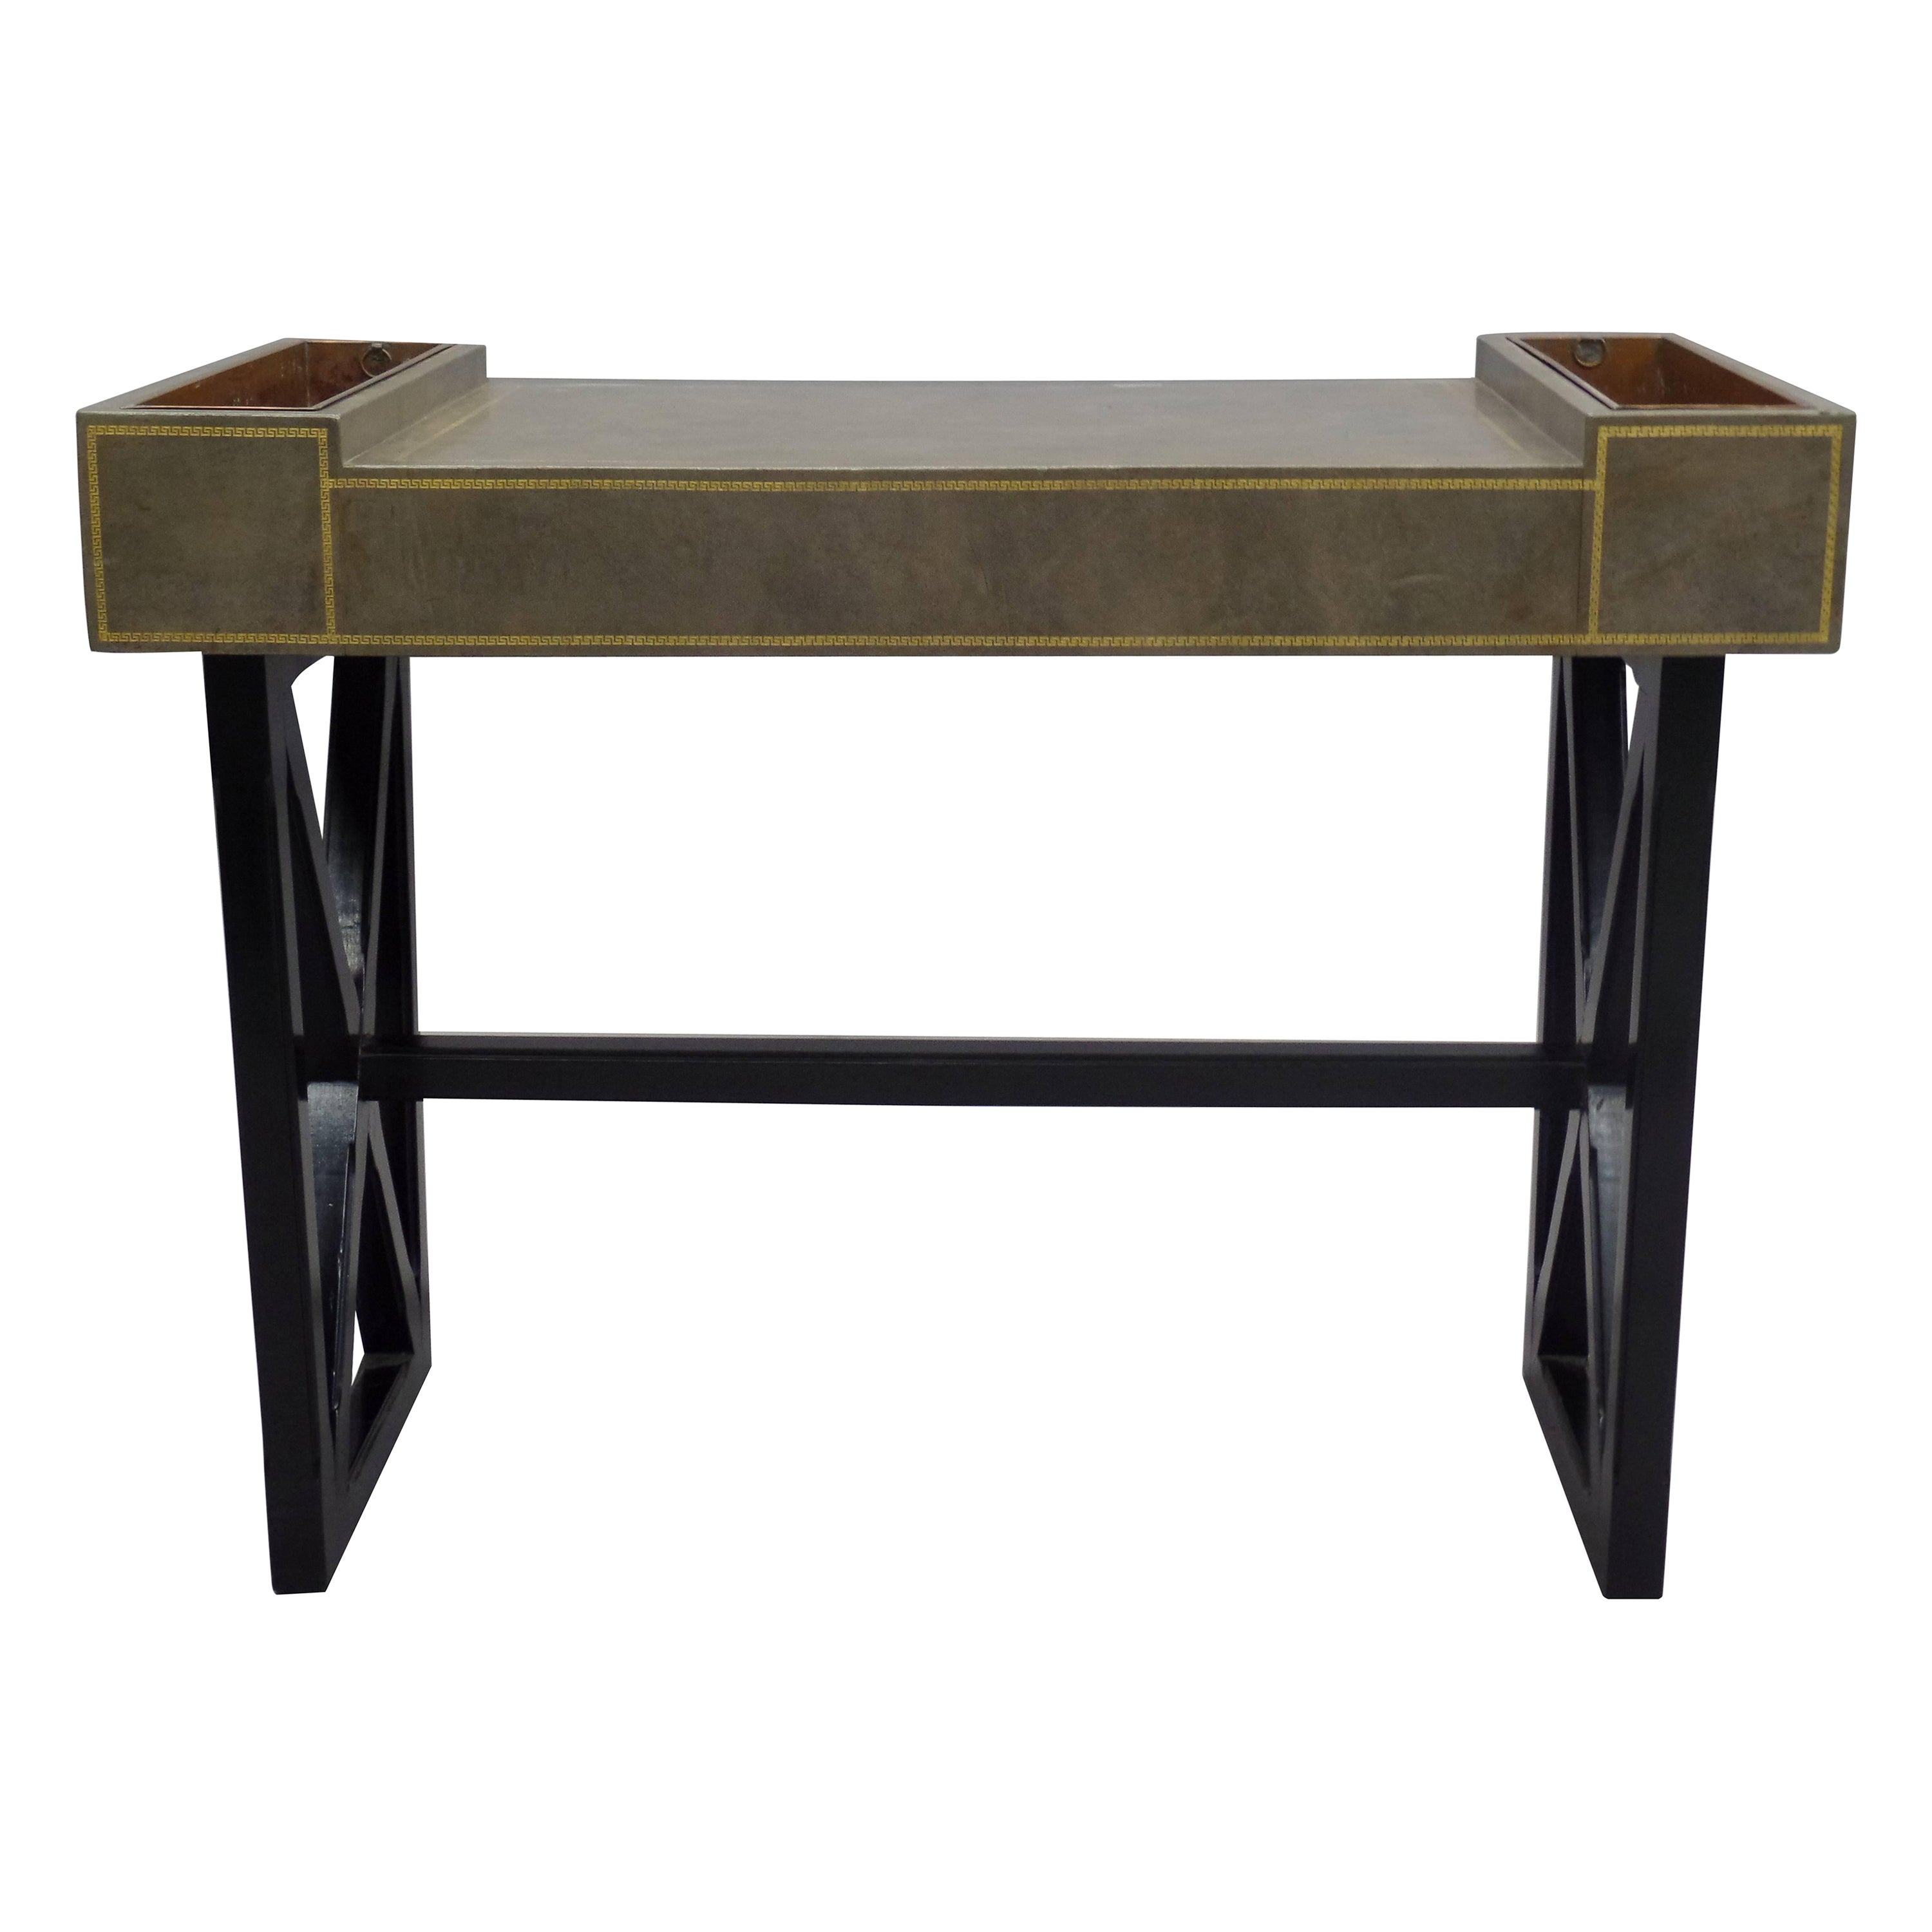 French Modern Neoclassical Ebony & Leather Desk /Writing Table, JeanMichel Frank